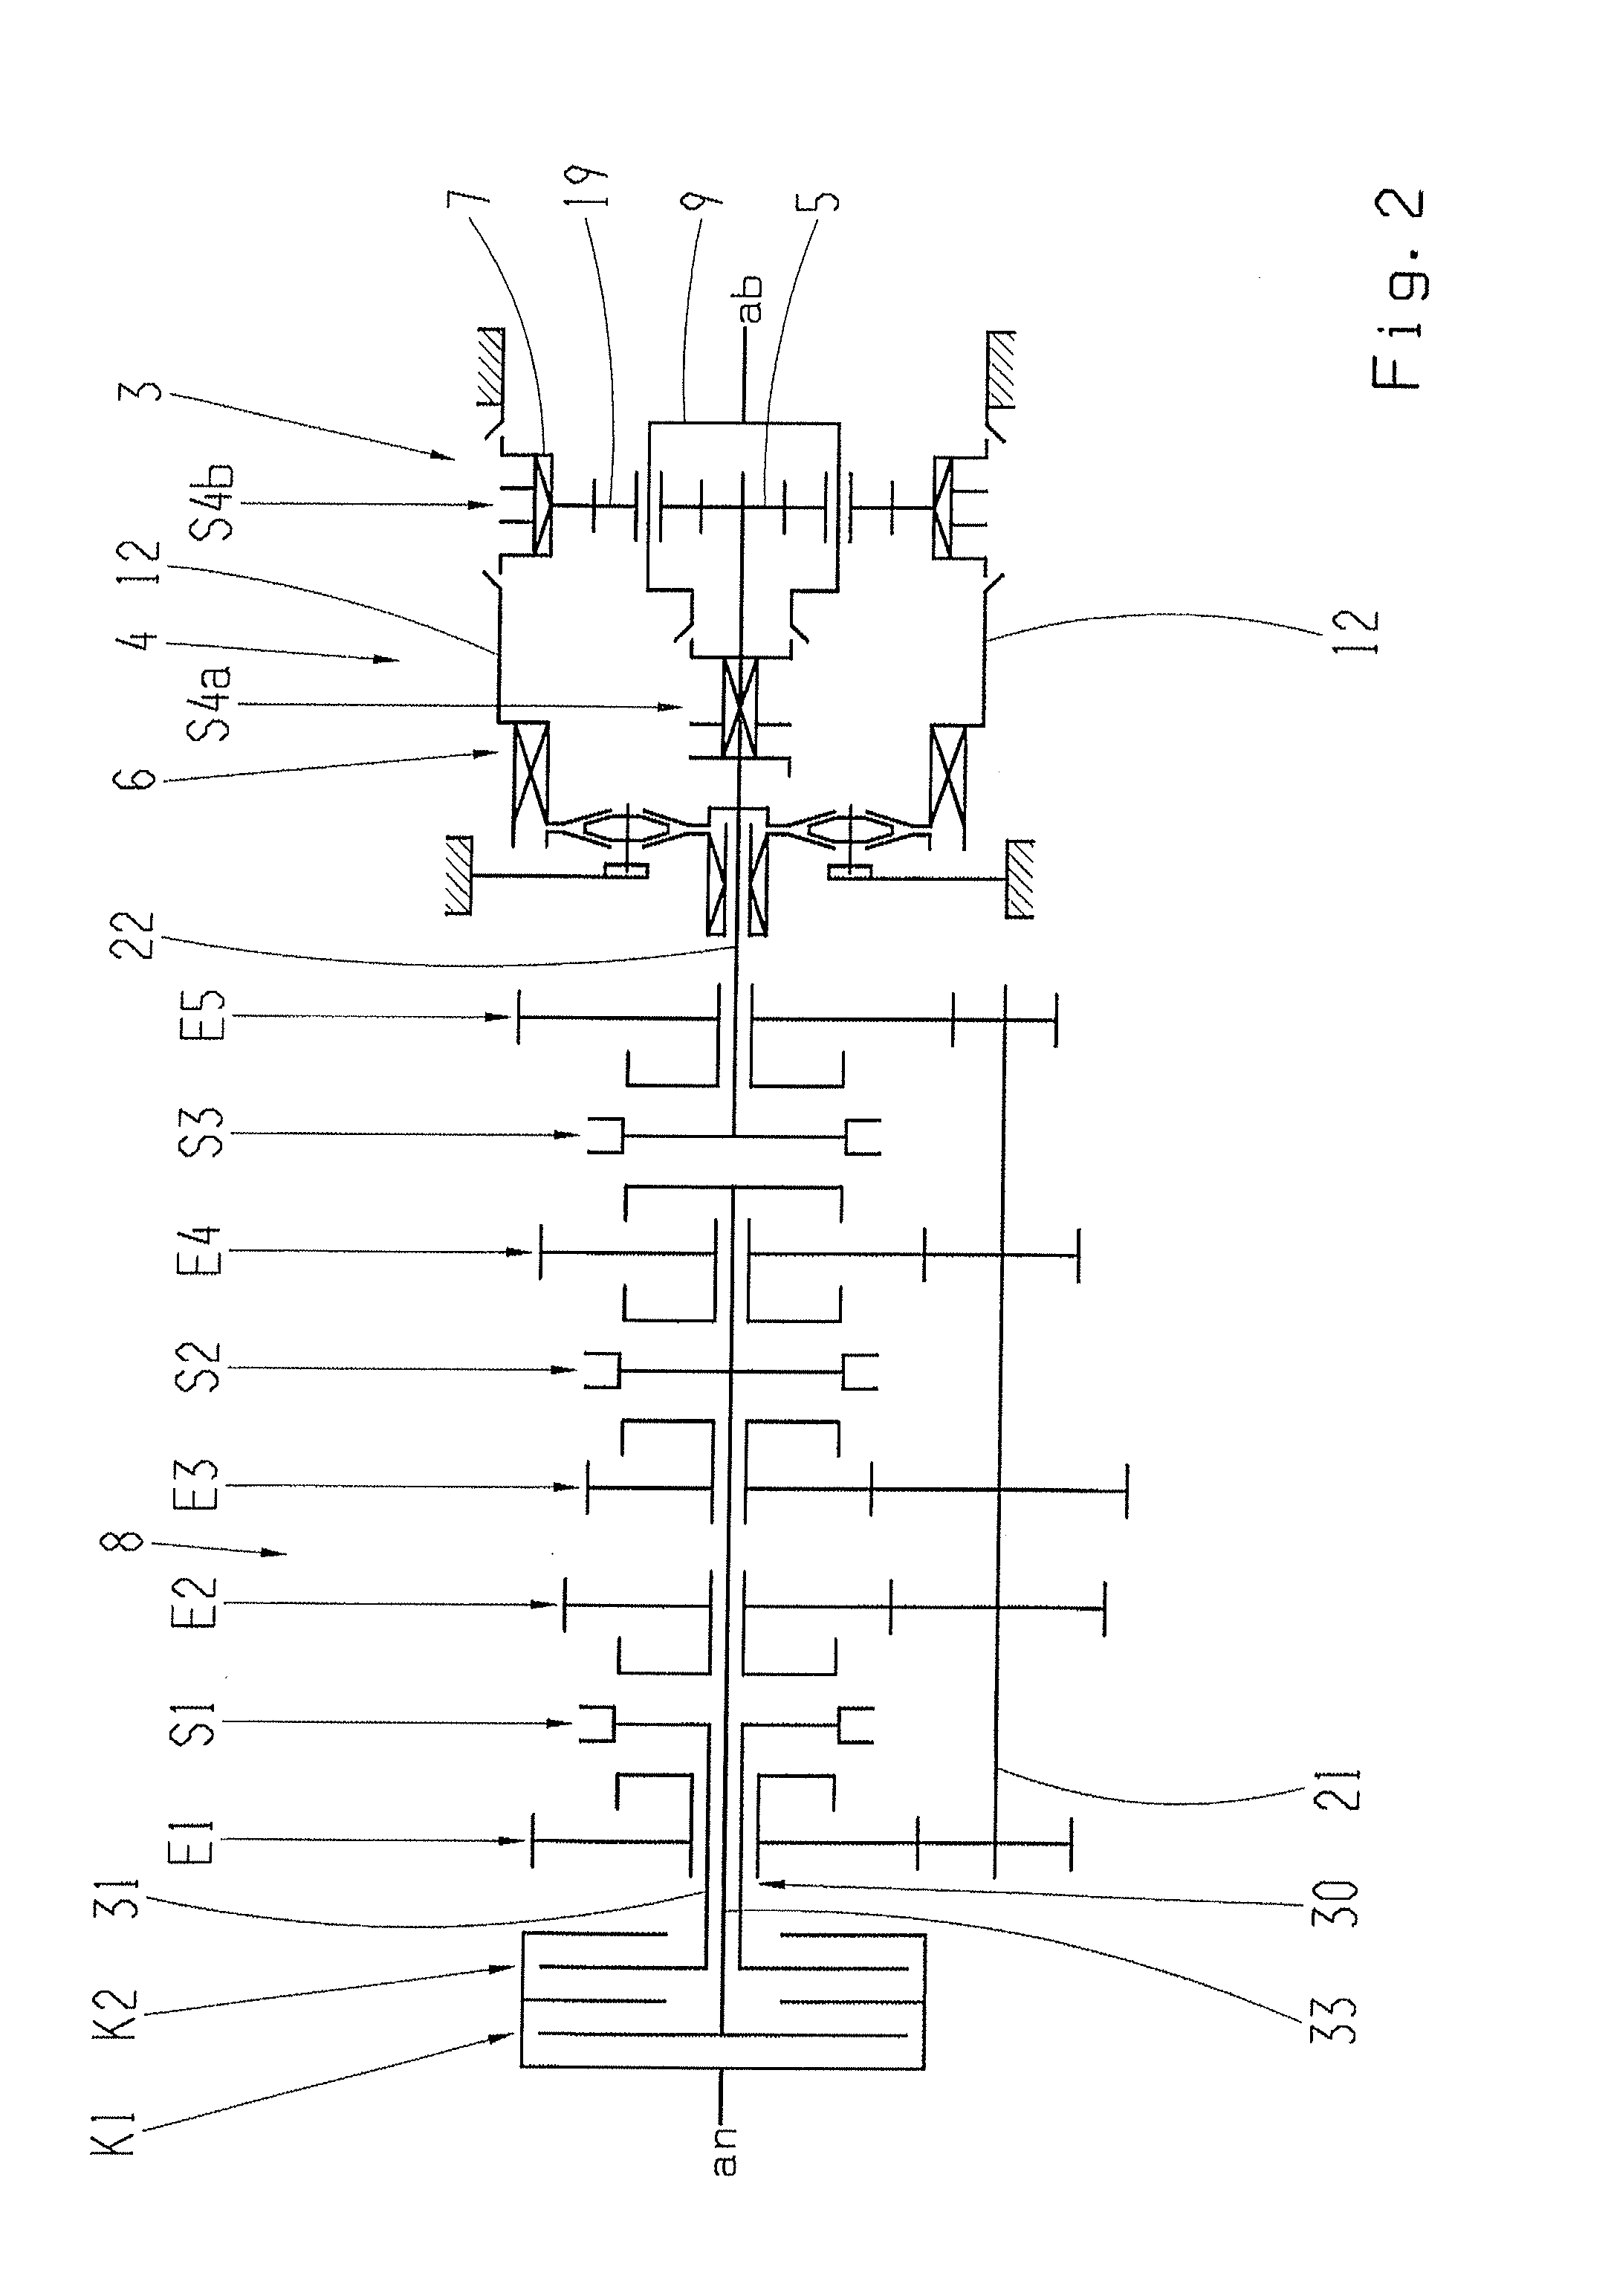 Transmission with disengageable variator